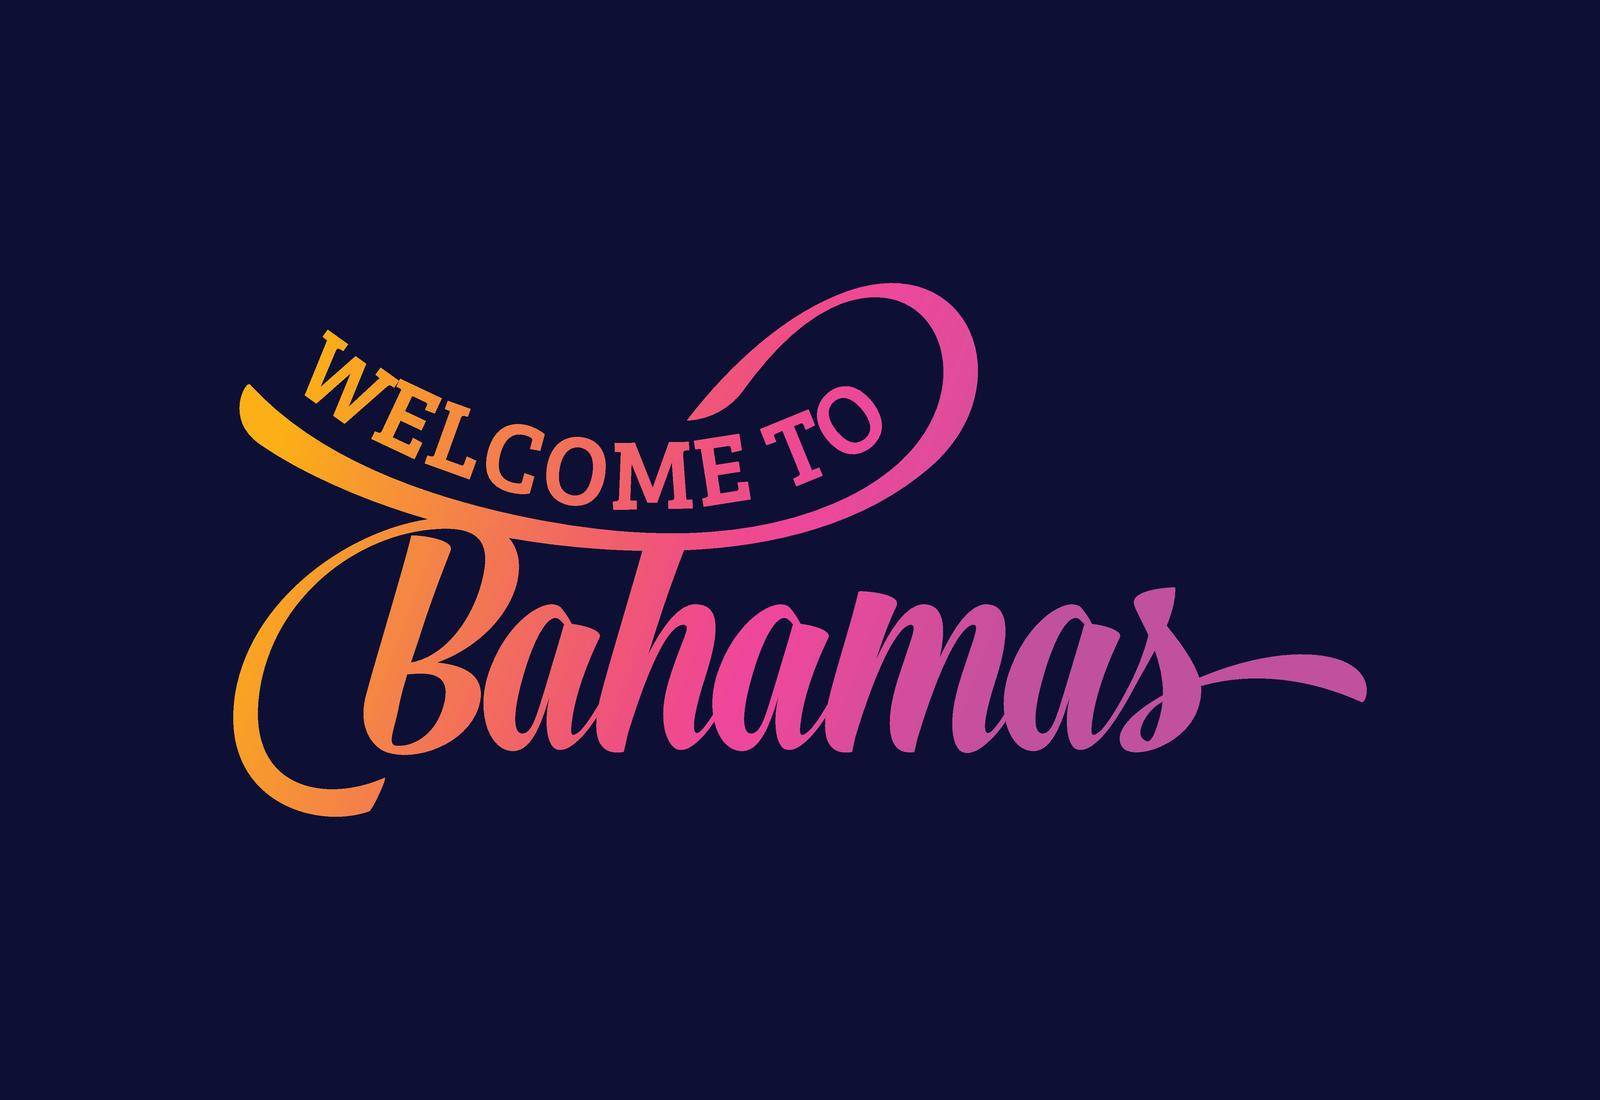 Welcome To Bahamas Word Text Creative Font Design Illustration. Welcome sign